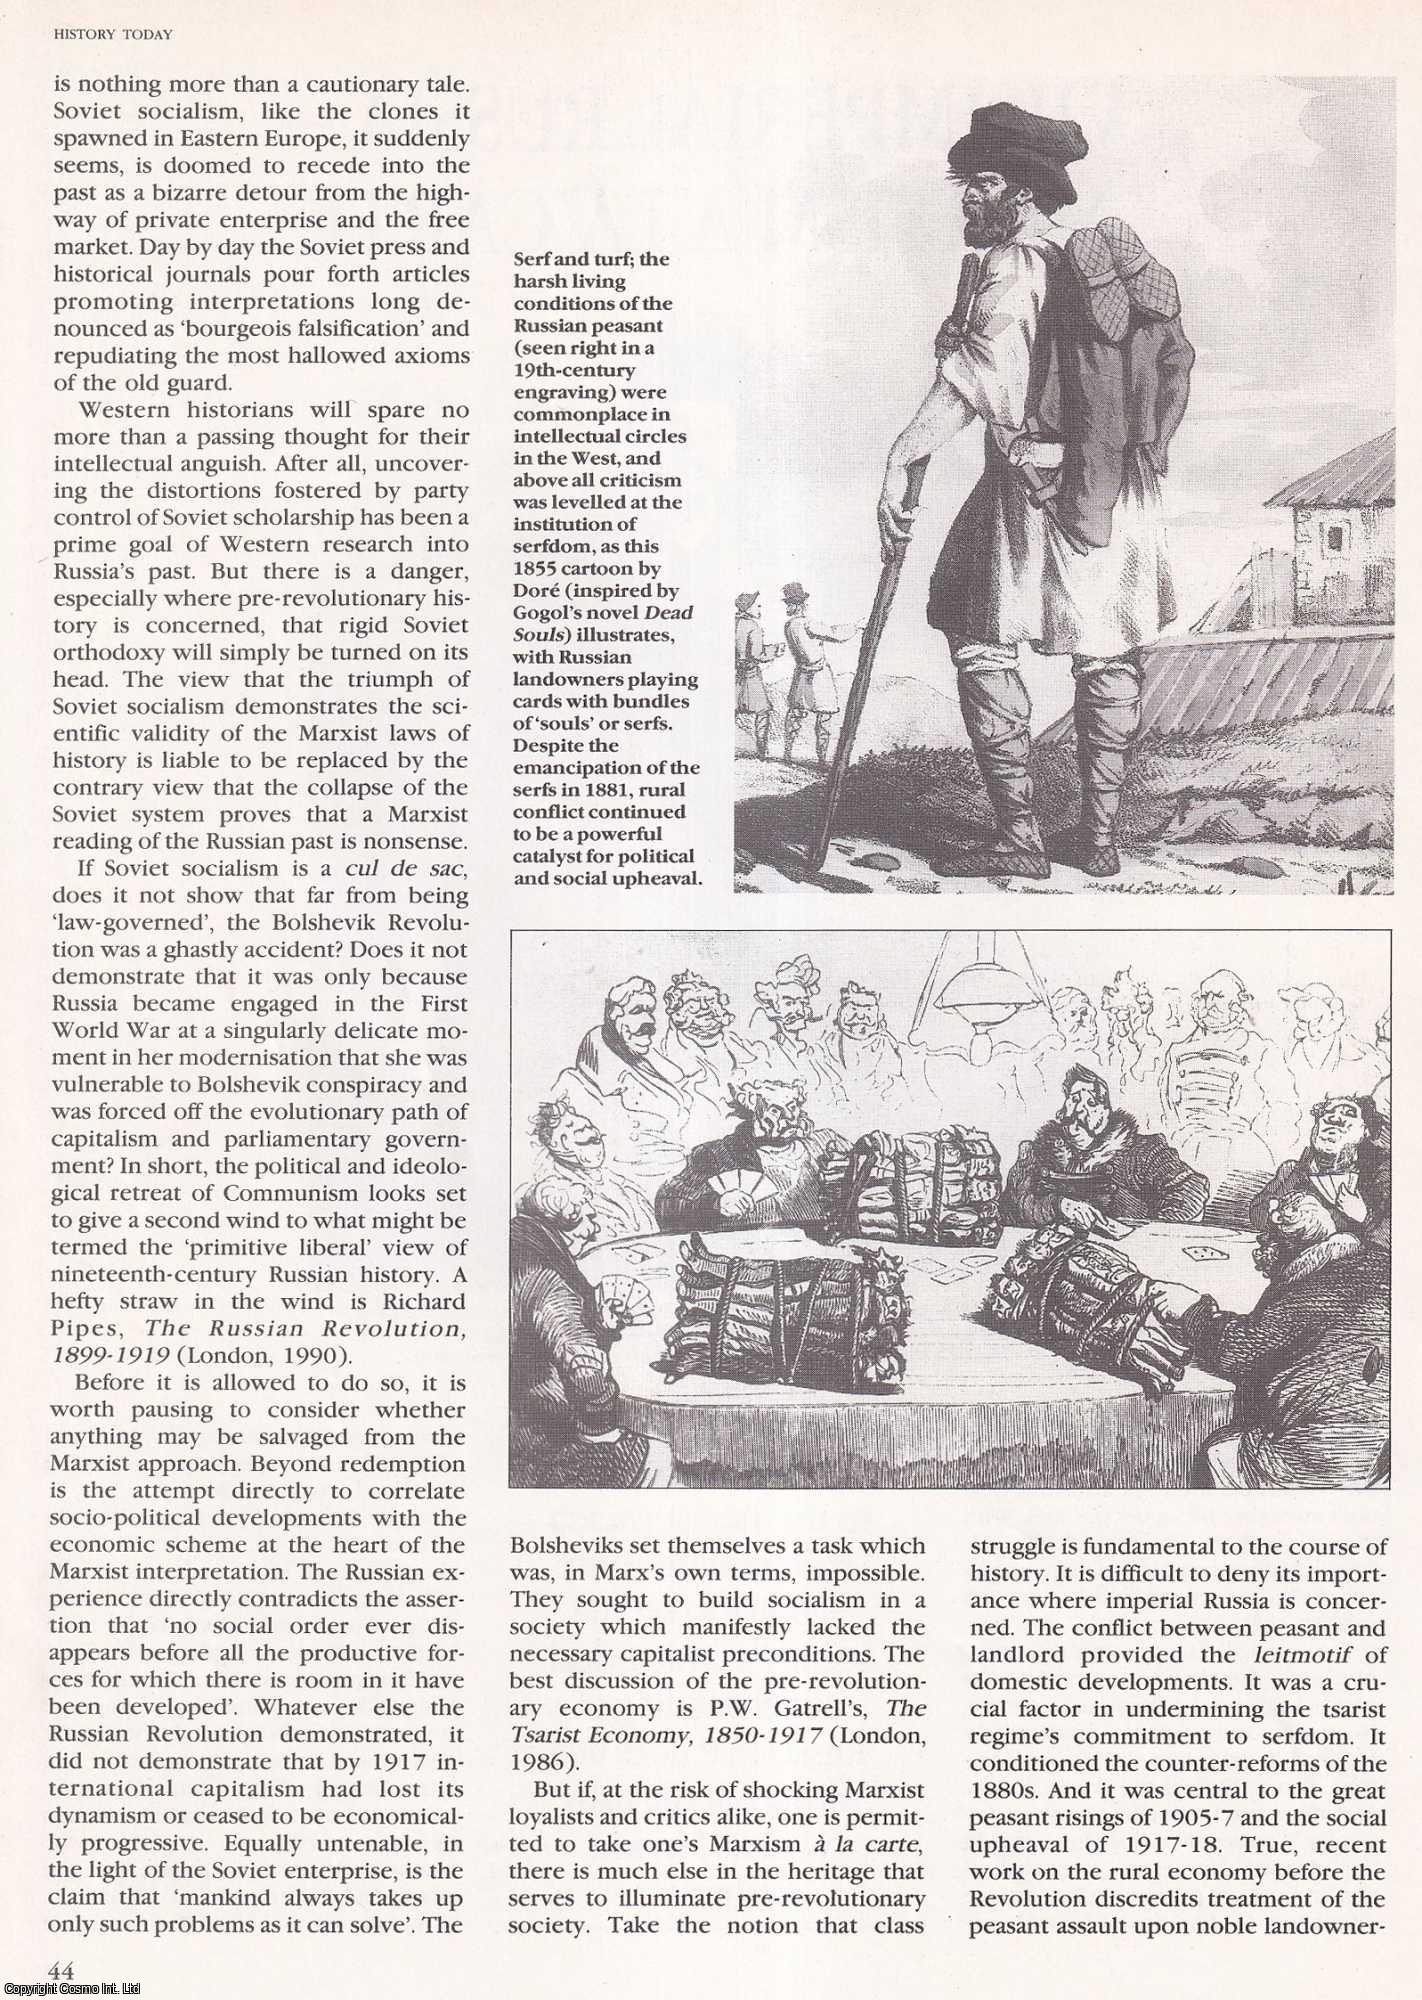 Edward Acton - Imperial Russia - Marxism a la Carte. An original article from History Today, 1991.